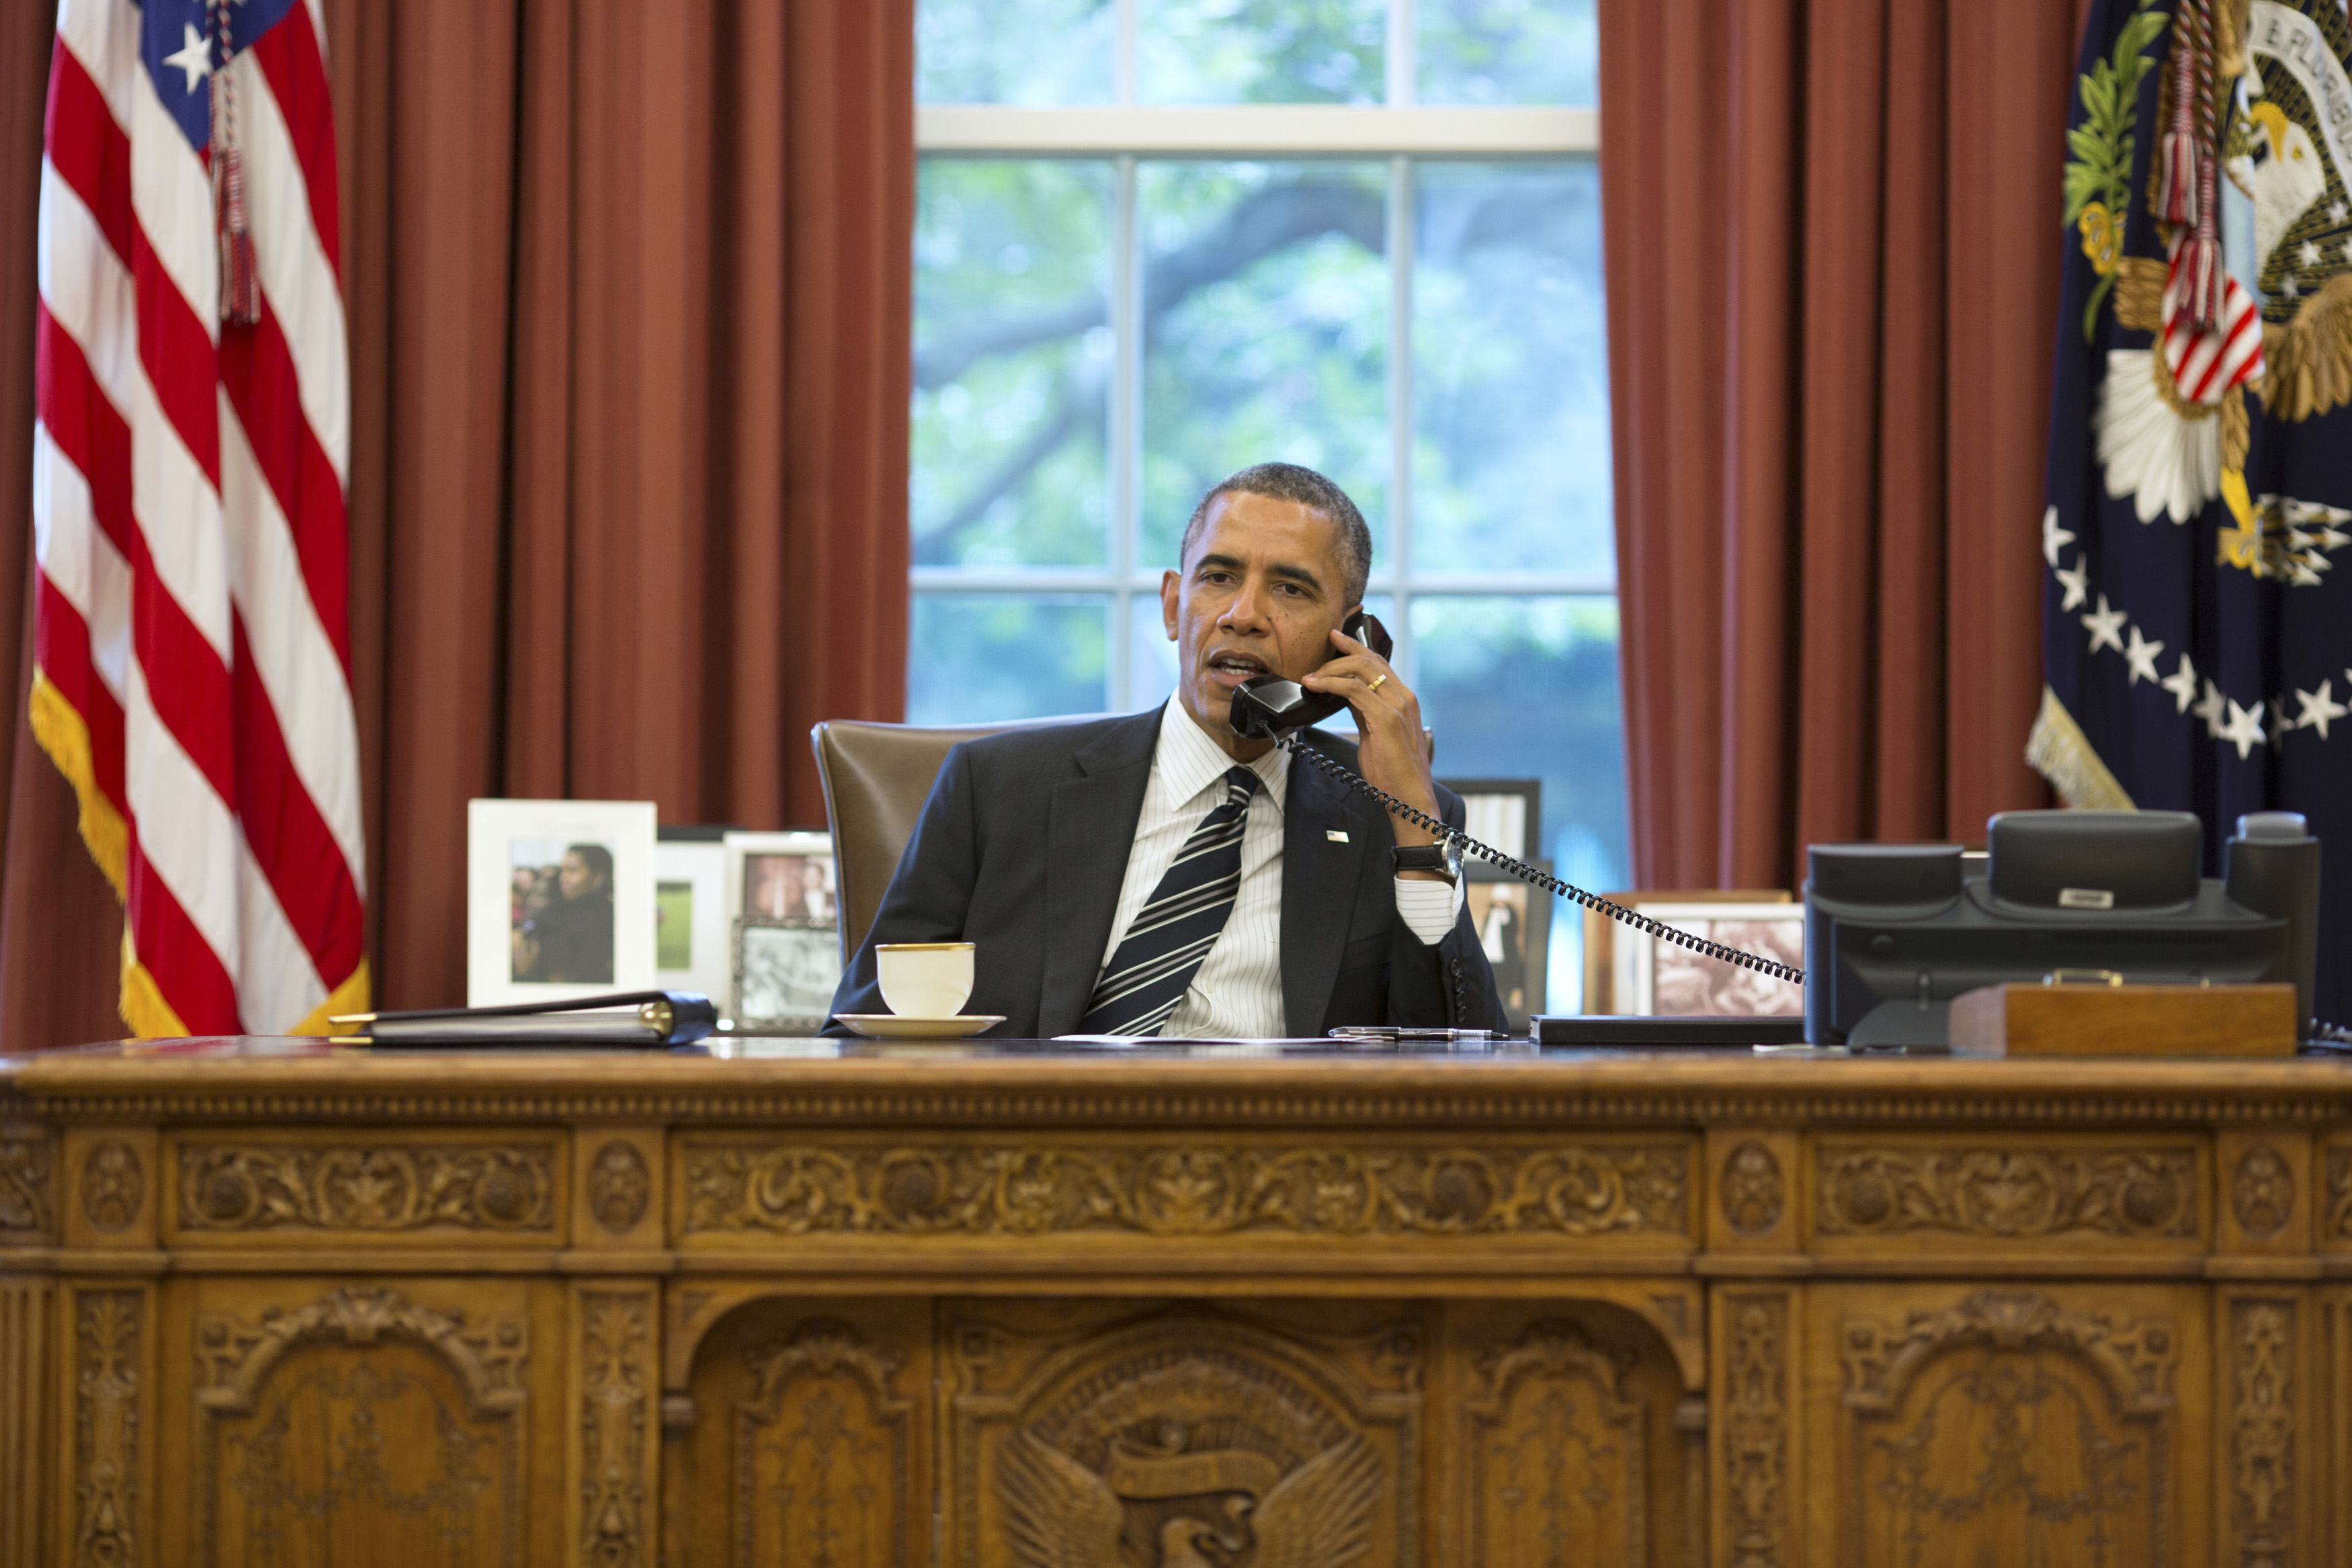 Obama and Iran's Rouhani speak in historic phone call